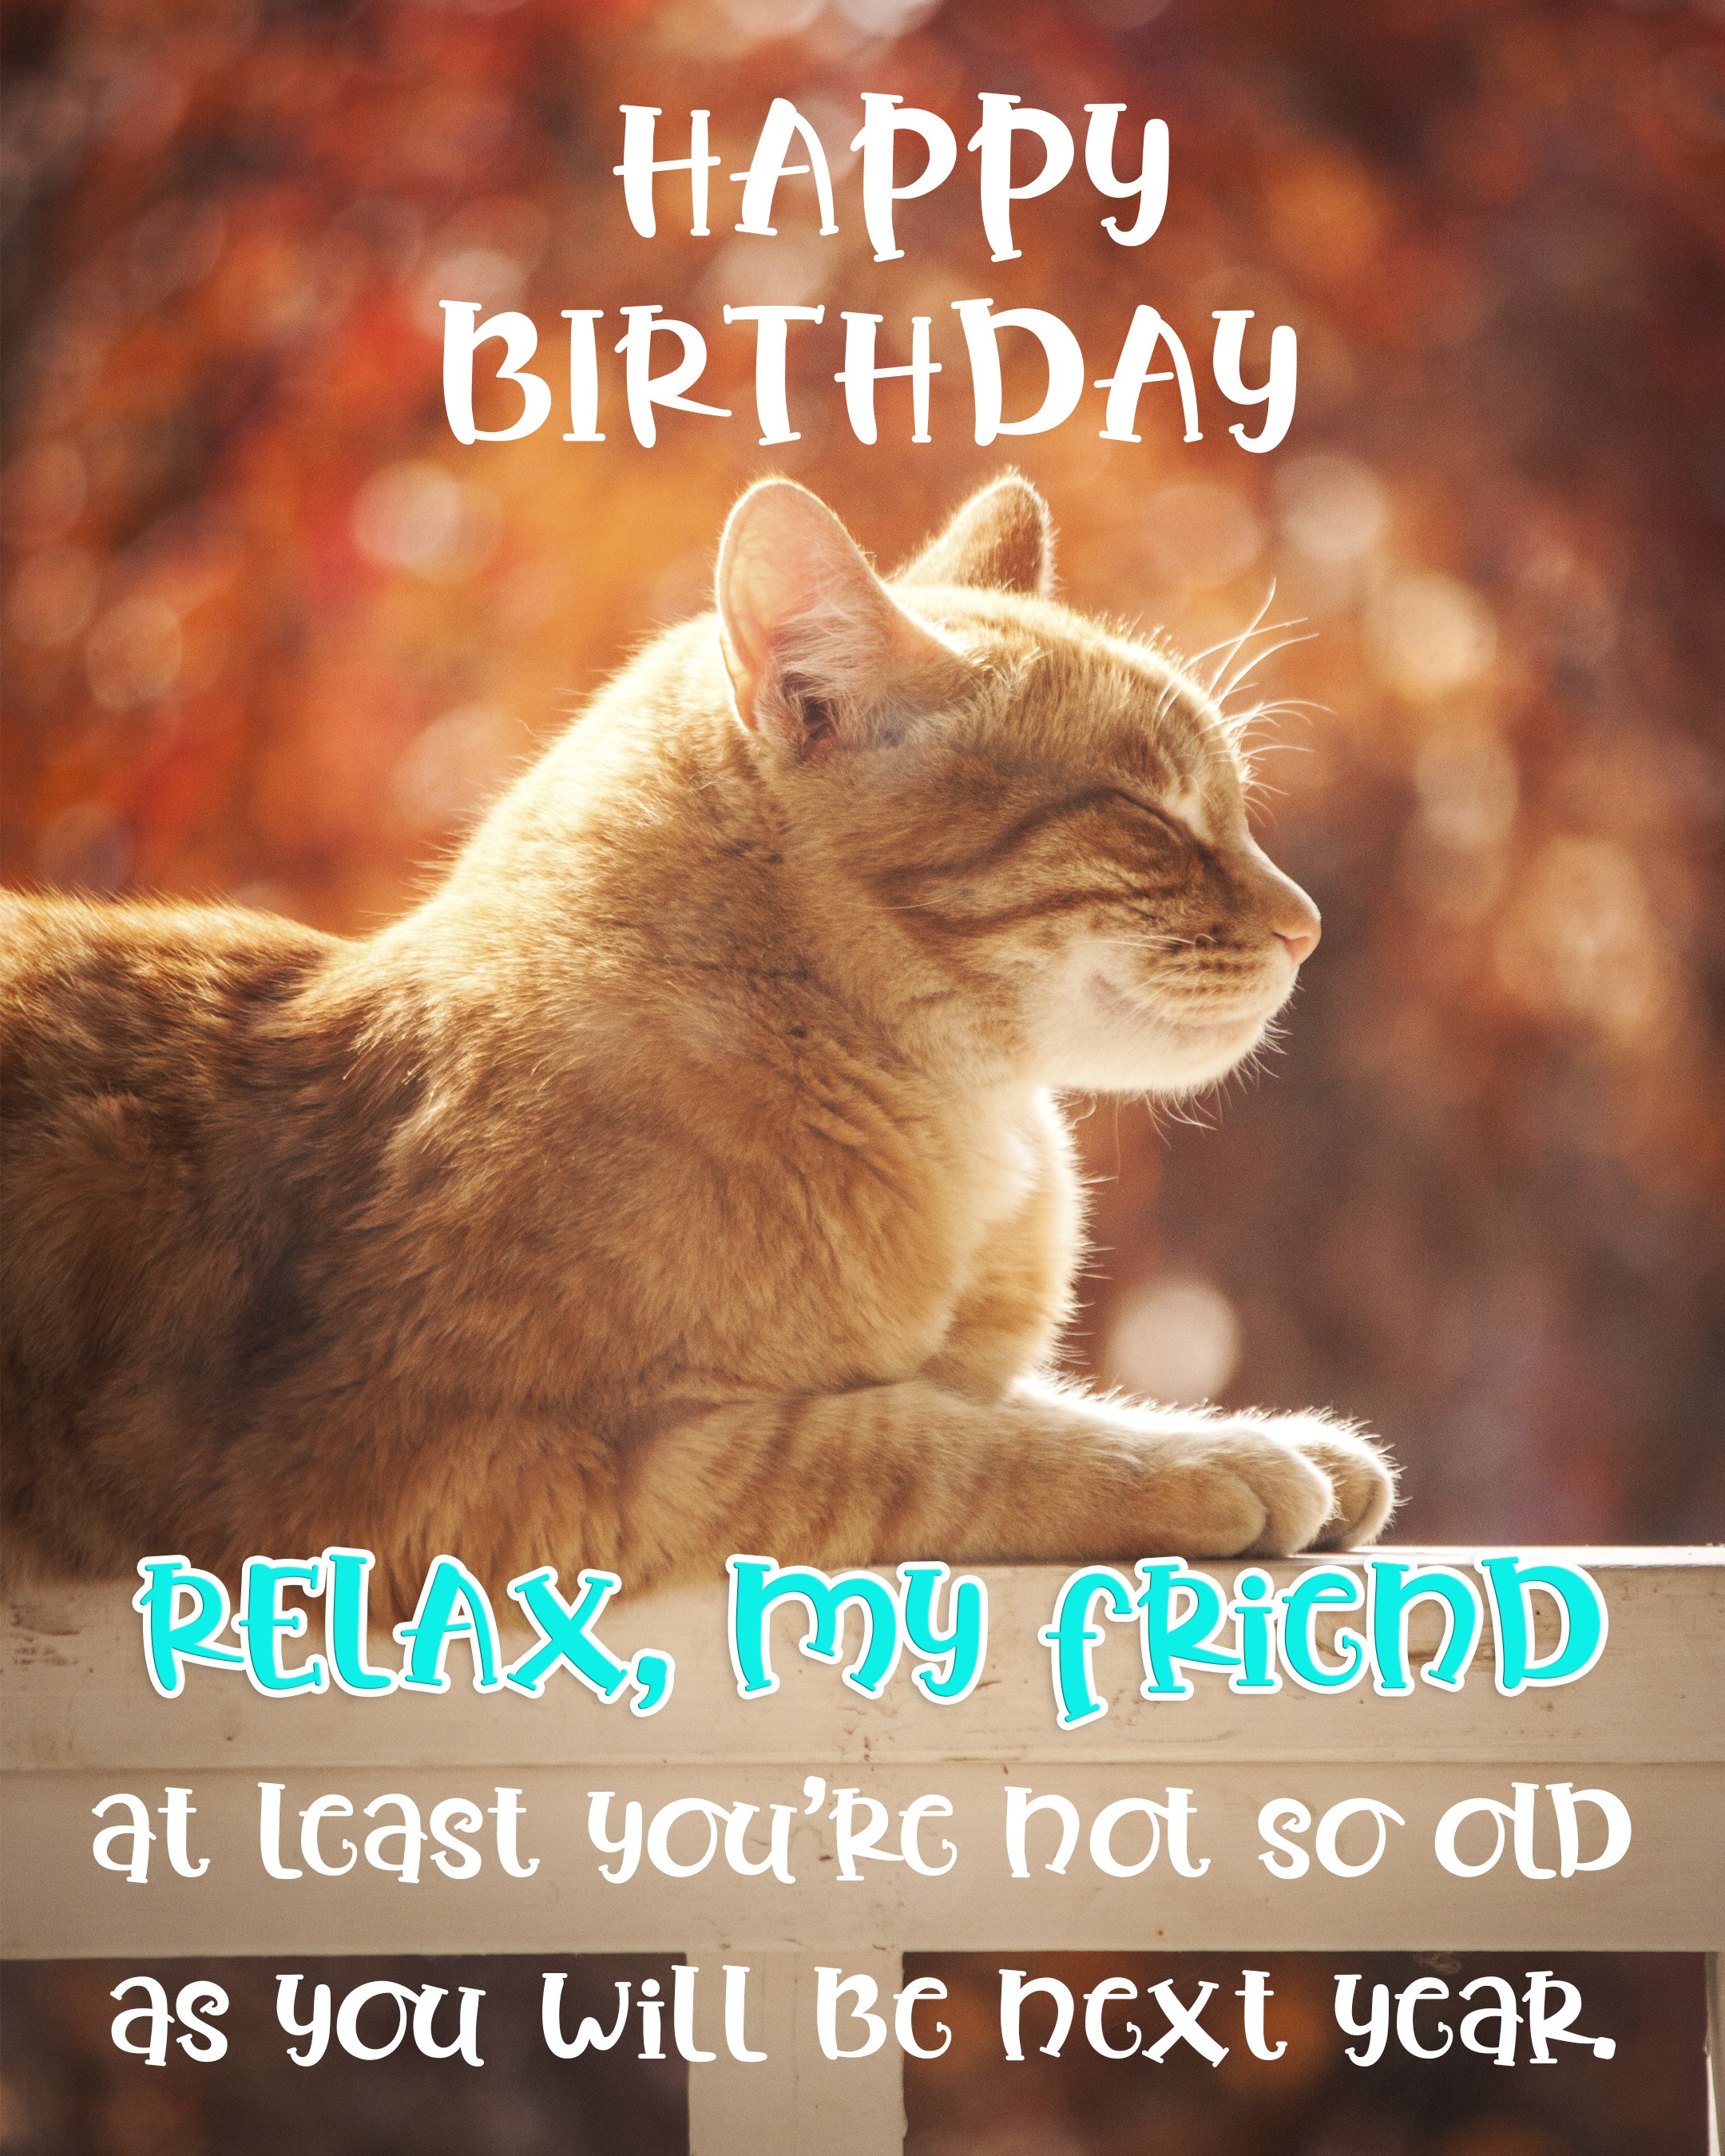 Free Friend Happy Birthday Image With Funny Cat 